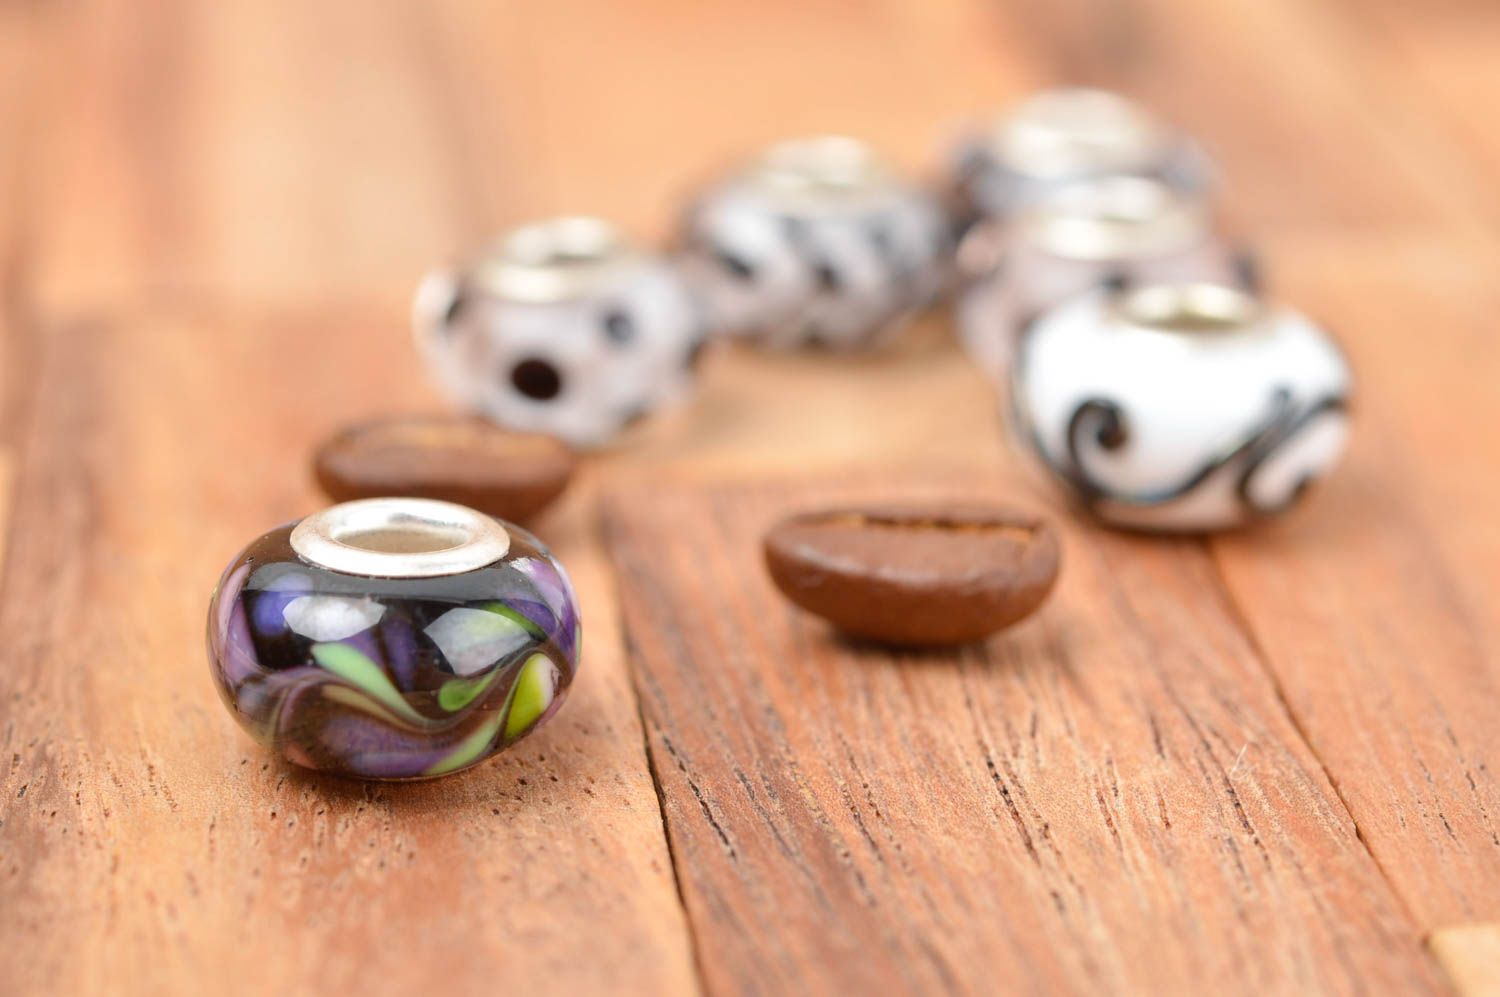 Designer fittings unusual beads designer accessory beads fittings for jewelry photo 1